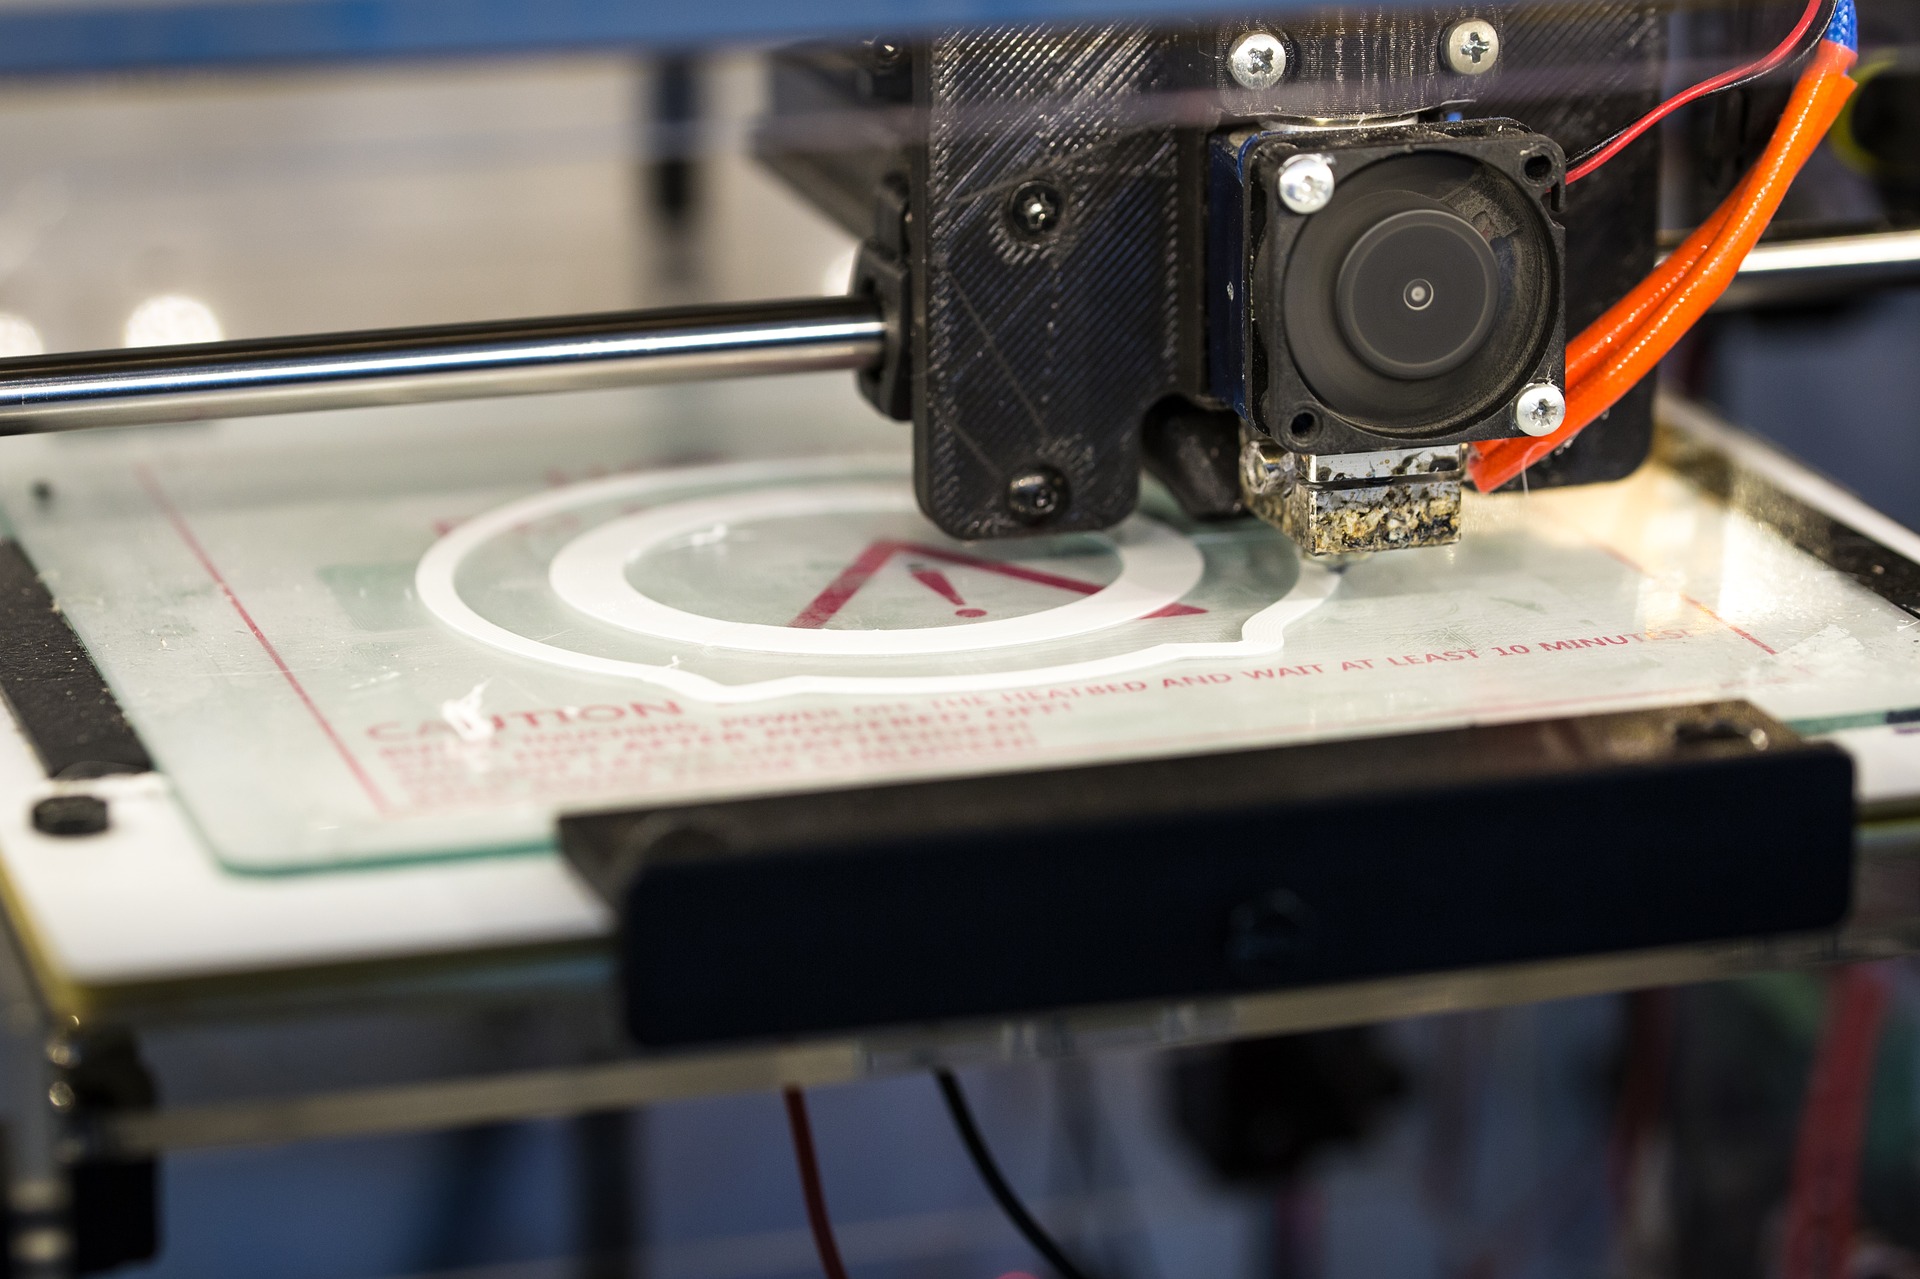 3 Transformative Ways 3D Printing Will Impact Our Daily Lives - Image 1